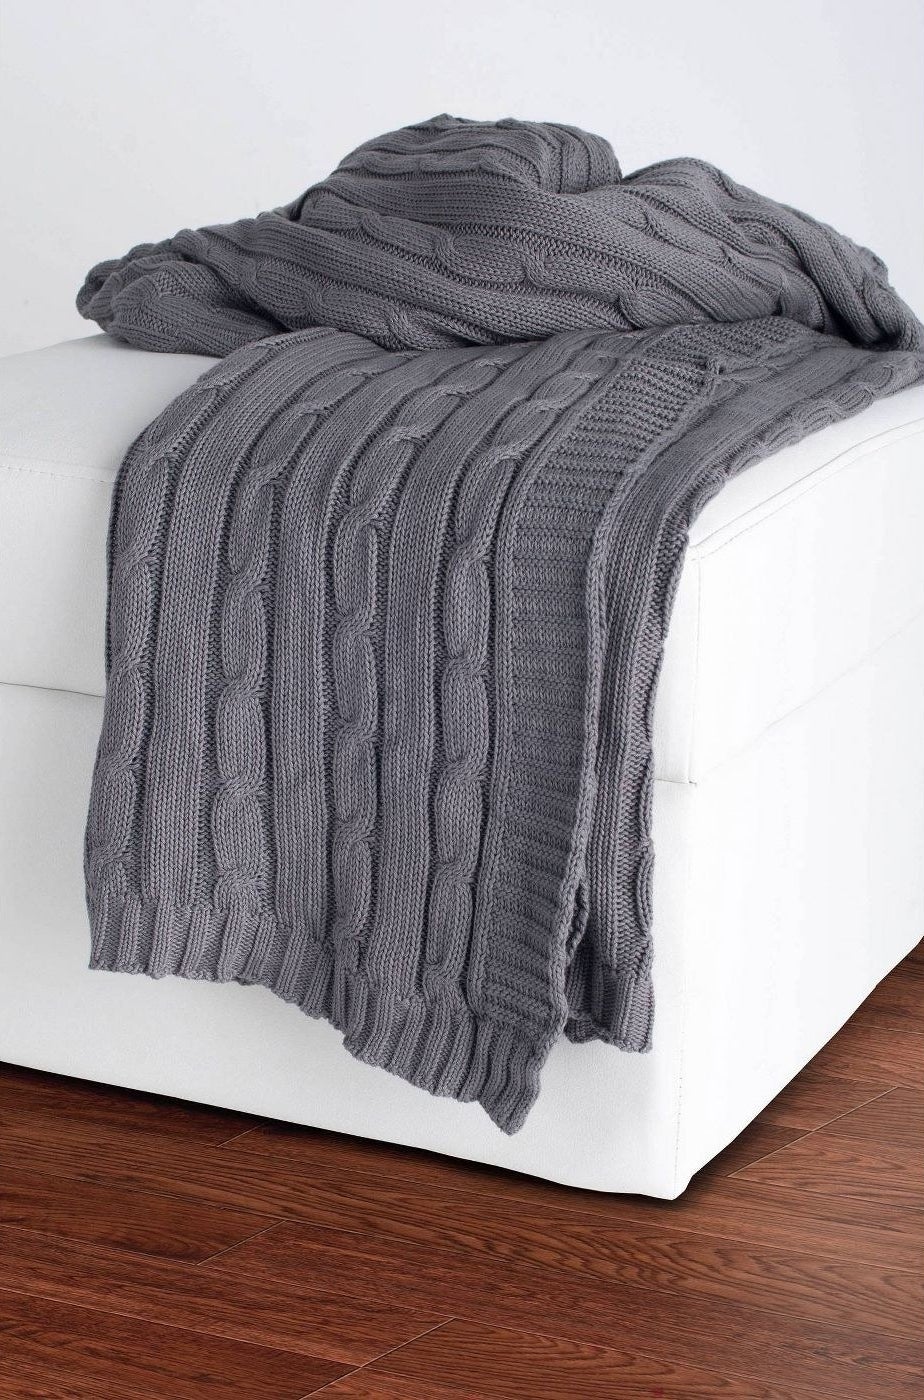 A gray cable knit blanket in a home